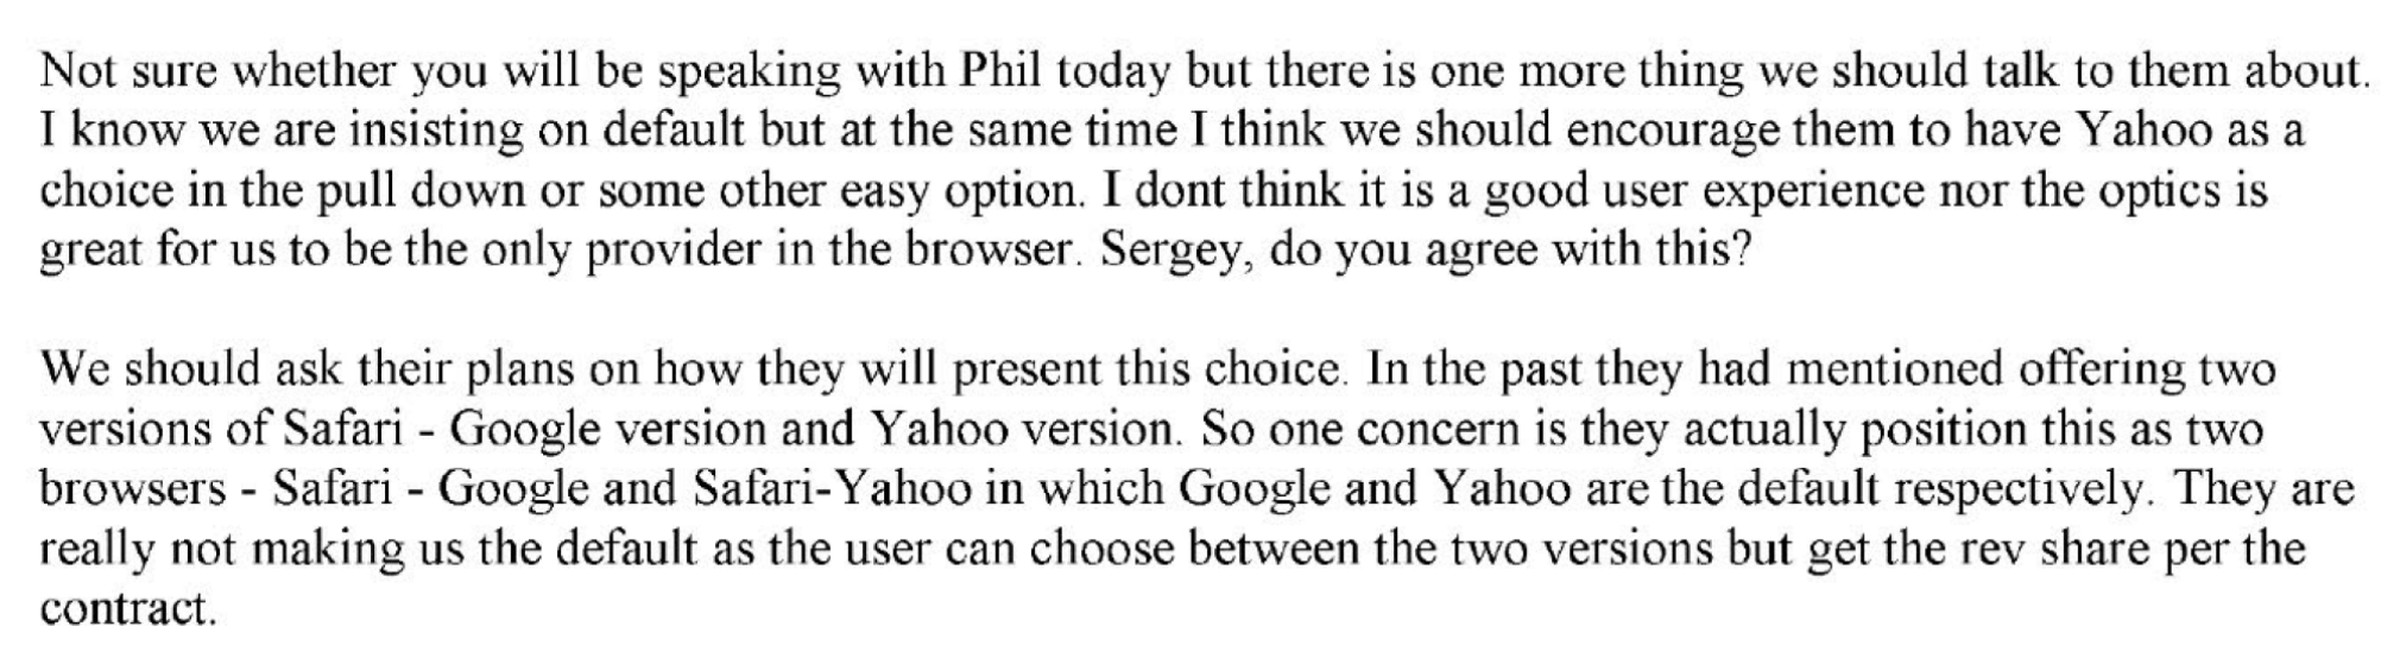 Not sure whether you will be speaking with Phil today, but there is one more thing we should talk to them about. I know we are insisting on the default but at the same time I think we should encourage them to have Yahoo as a choice in the pull down or some other easy option. I don’t think it is a good user experience nor the optics is great for us to be the only provider in the browser. Sergey, do you agree with this?